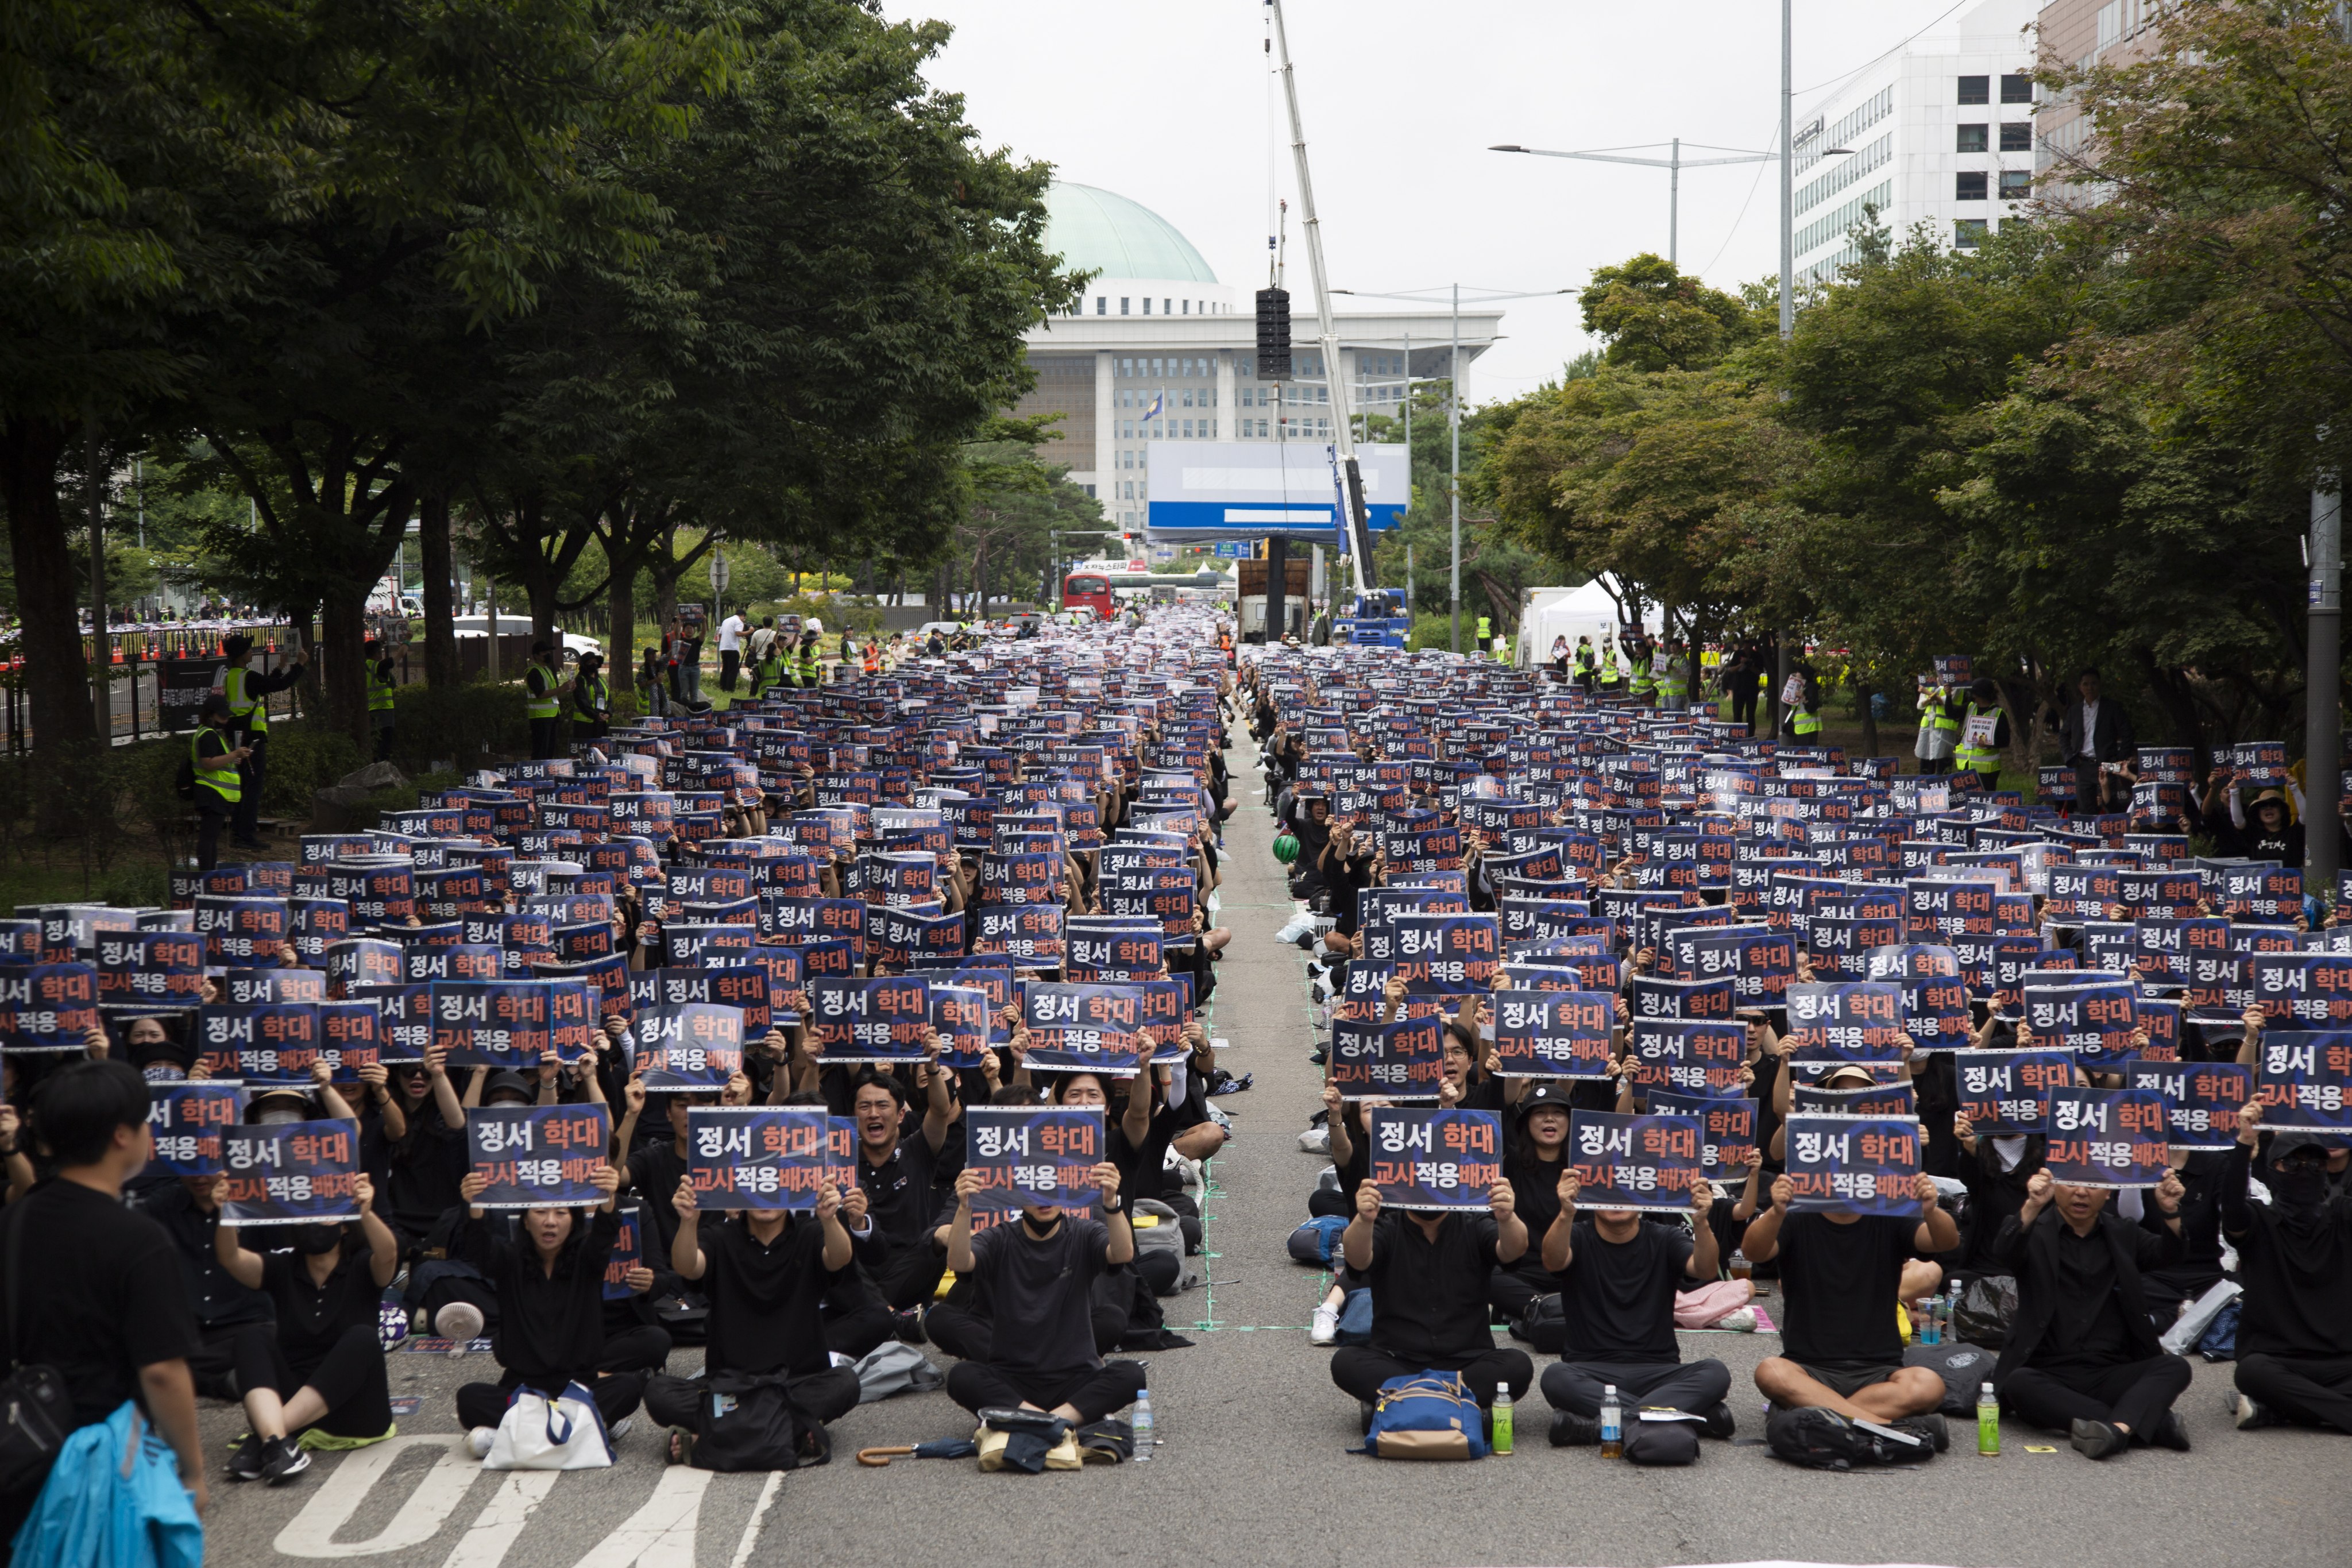 South Korean teachers at a rally against the government’s education policy outside the National Assembly in Seoul. The protesting teachers, who have rallied for weeks, say current laws make it difficult to exercise control over their classrooms and leave them at the mercy of overbearing parents. Photo: EPA-EFE